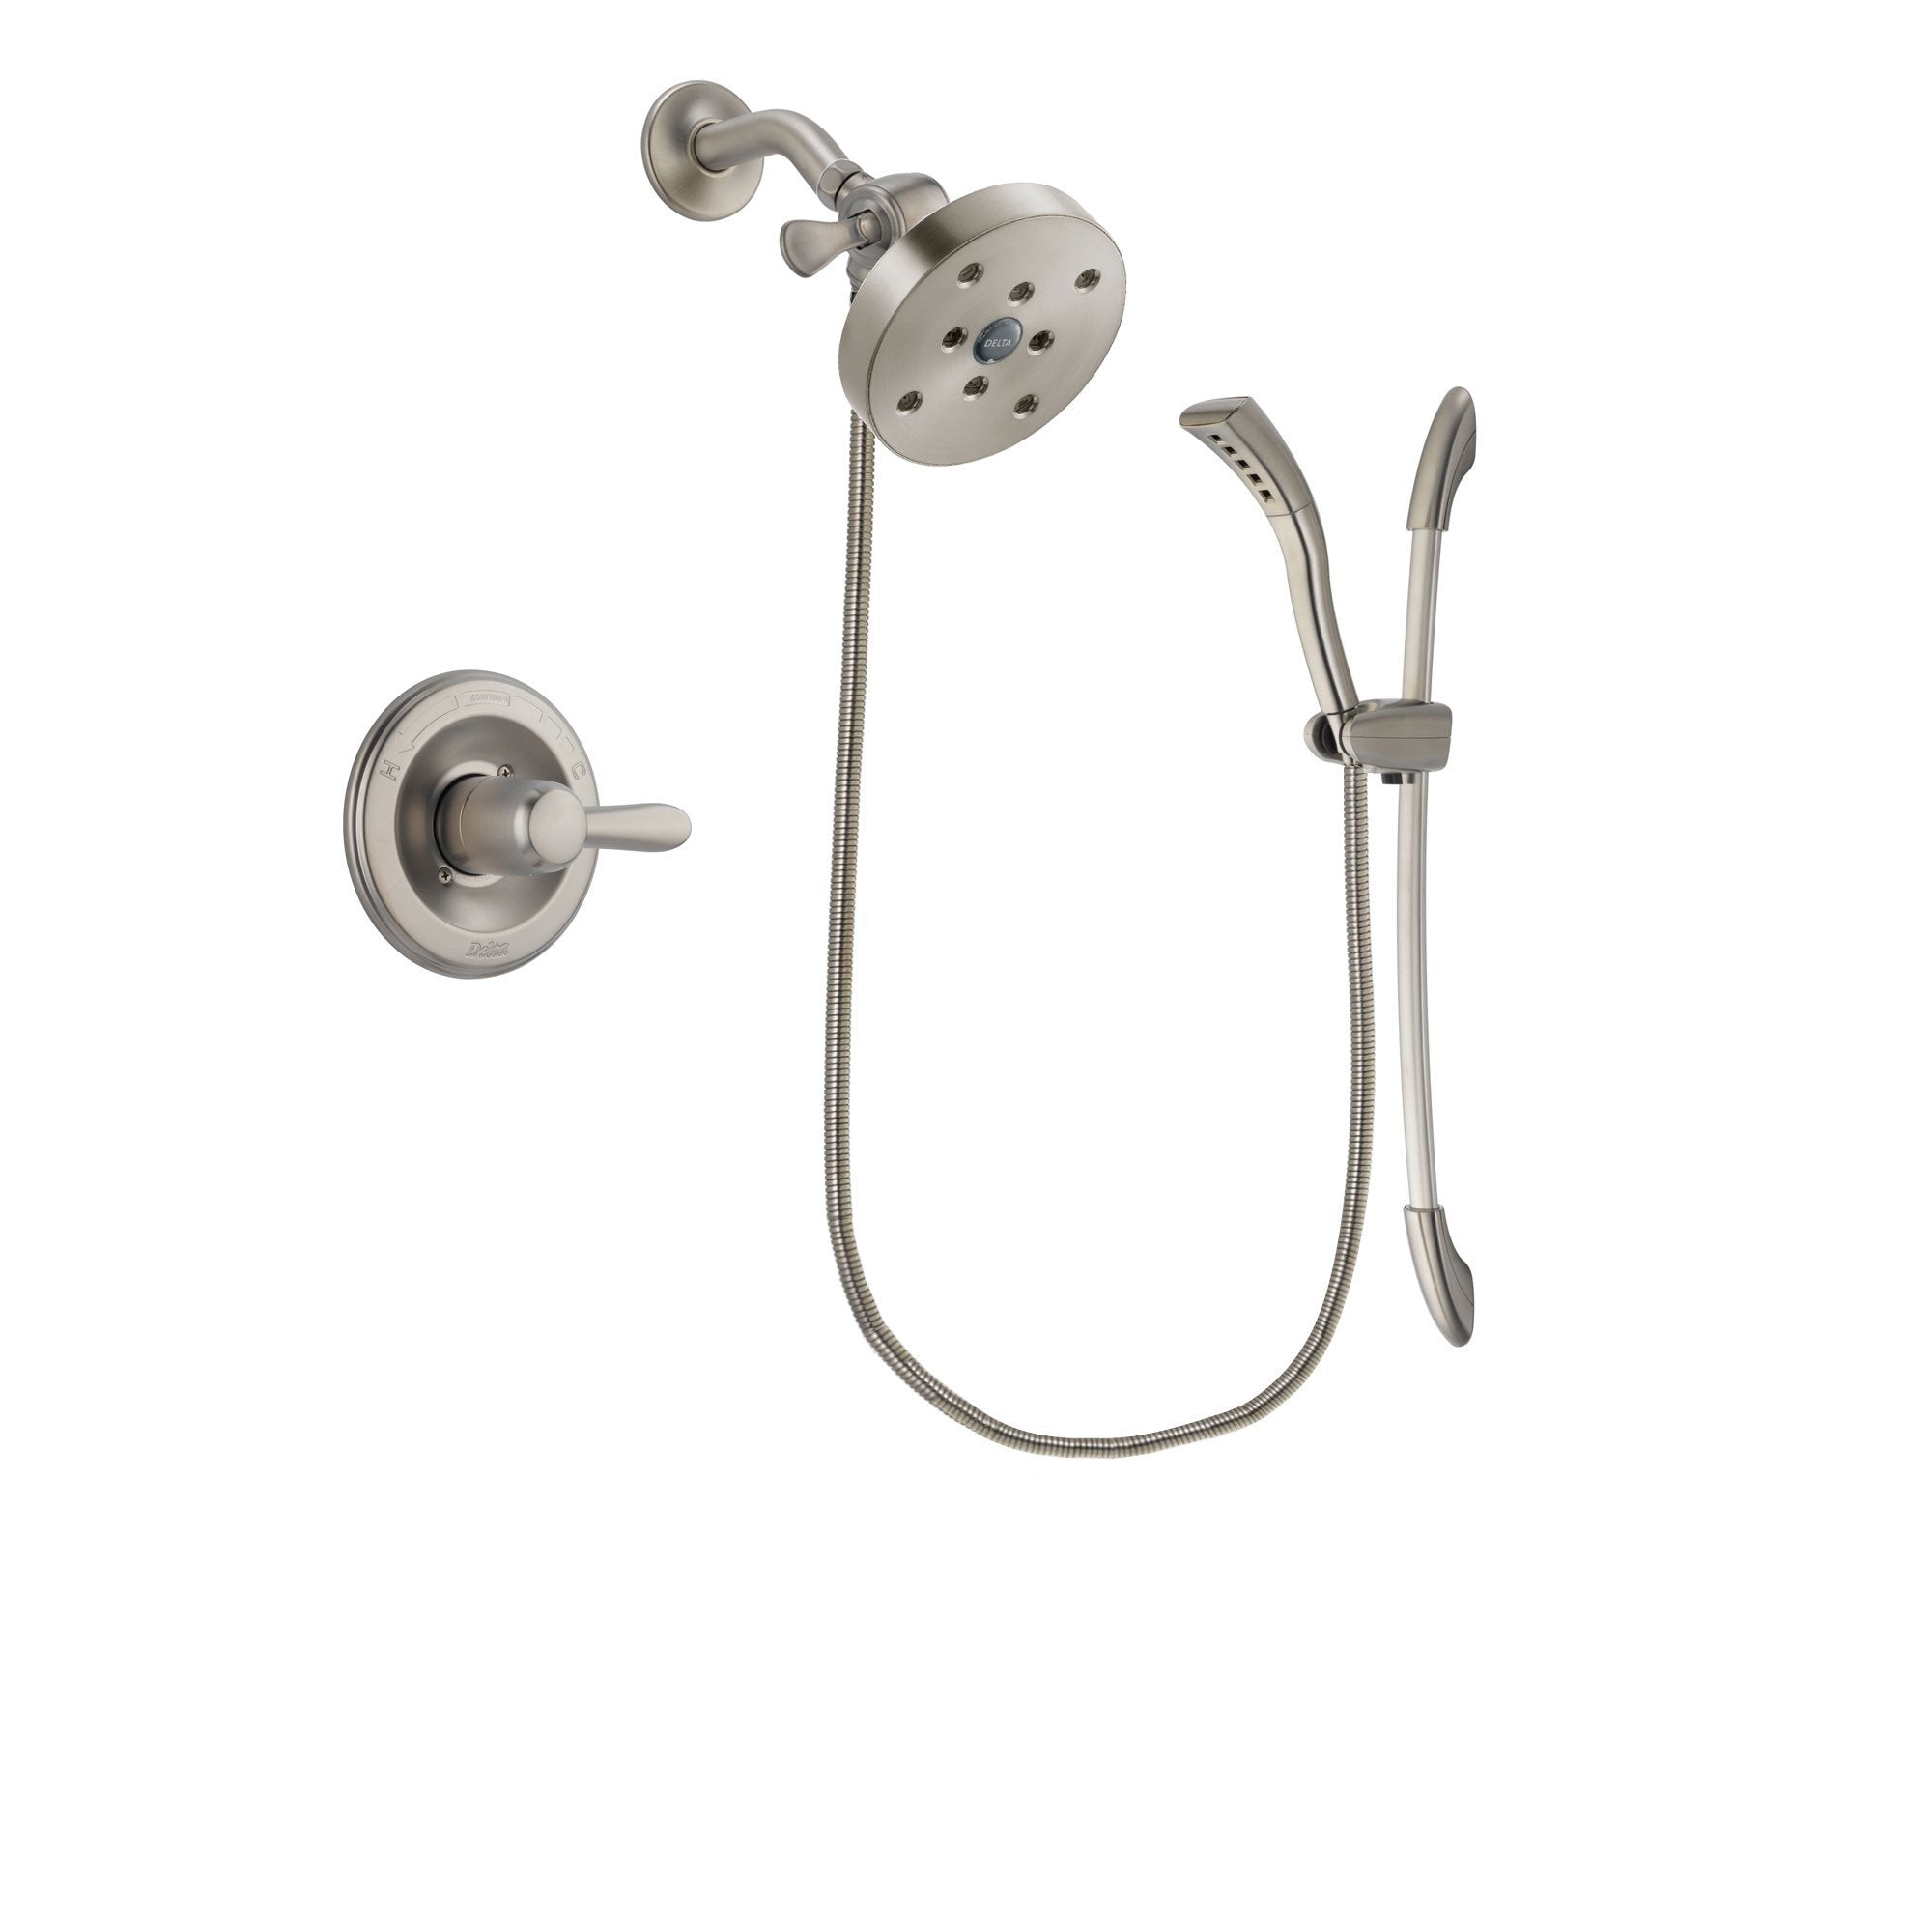 Delta Lahara Stainless Steel Finish Shower Faucet System Package with 5-1/2 inch Shower Head and Handshower with Slide Bar Includes Rough-in Valve DSP1490V